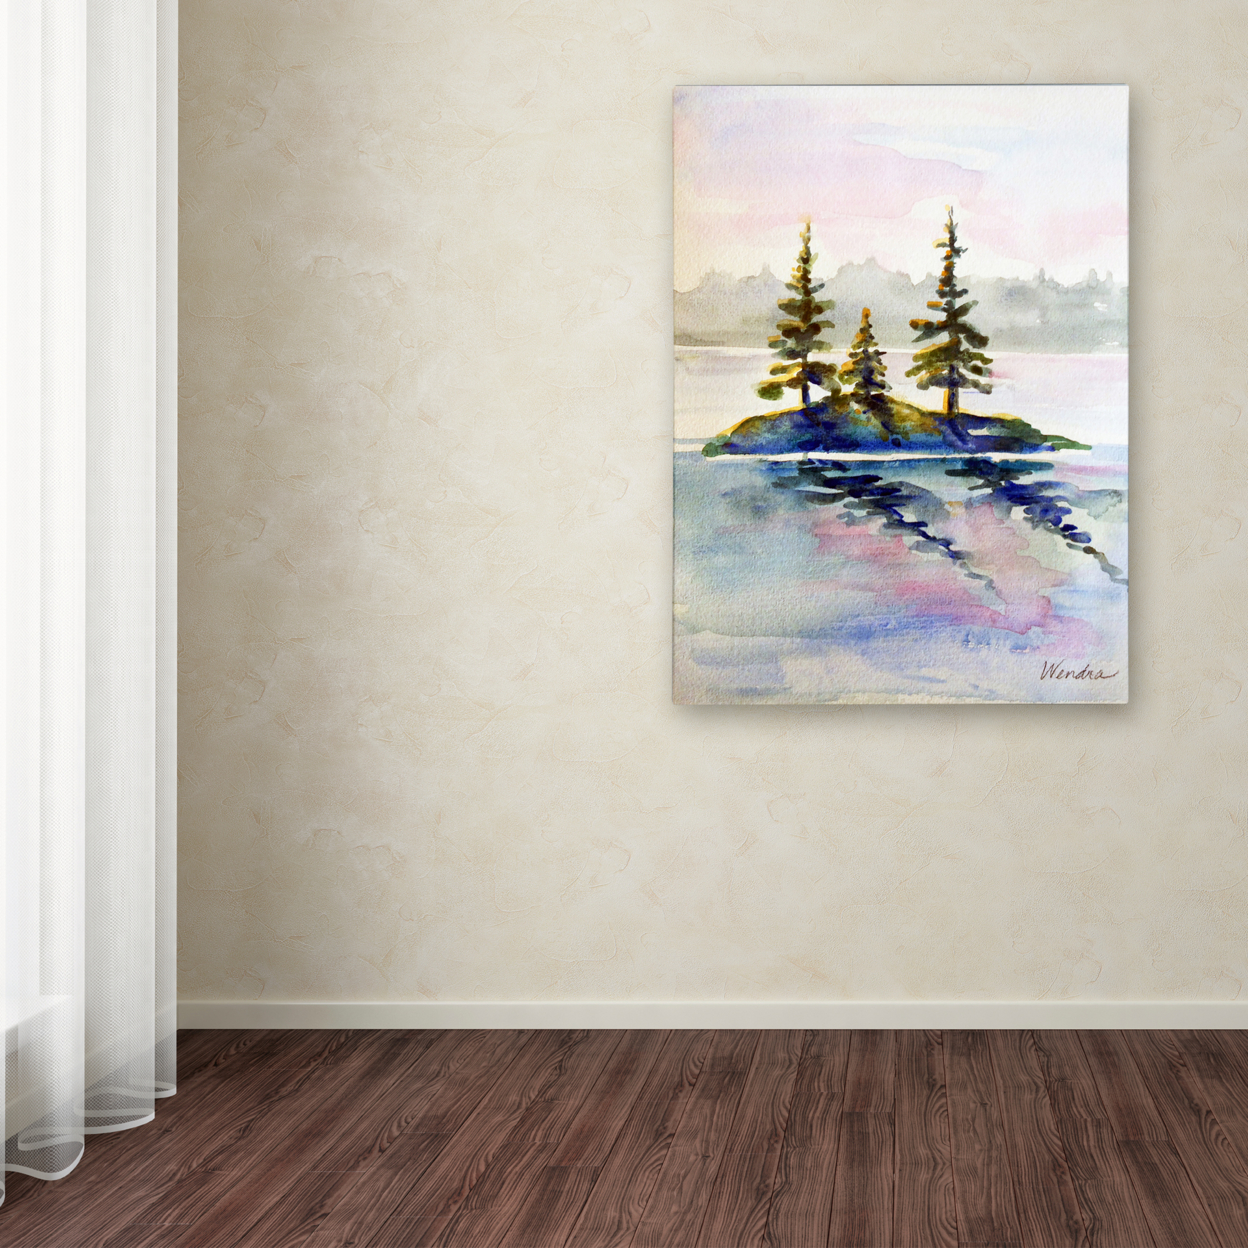 Wendra 'Little Island' Canvas Wall Art 35 X 47 Inches